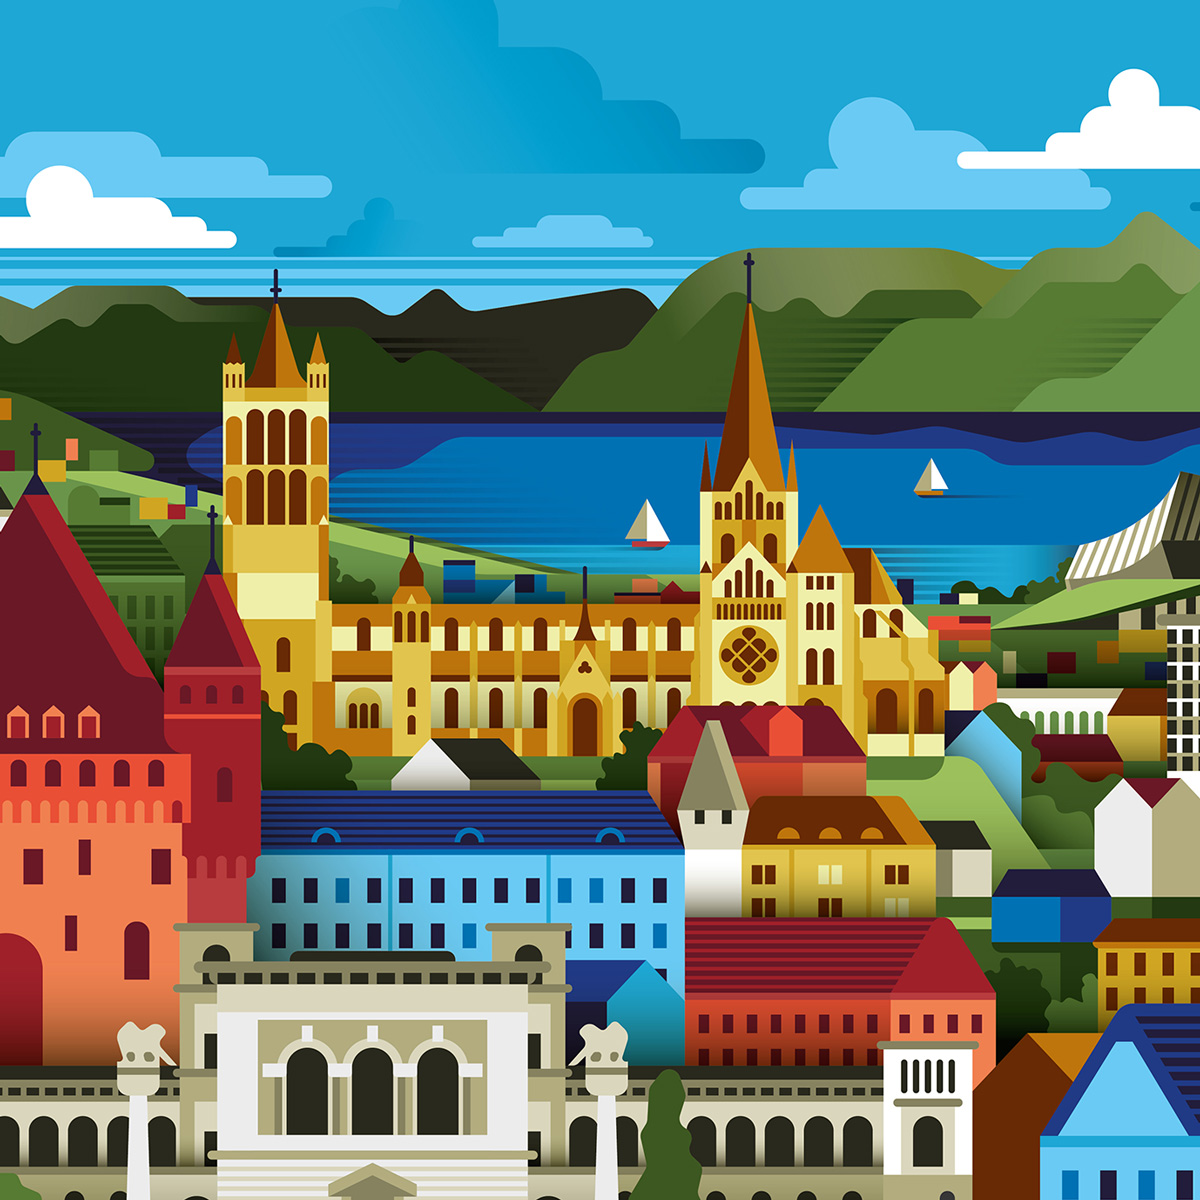 zoomed version of the Illustrated landscape of Lausanne, Switzerland.